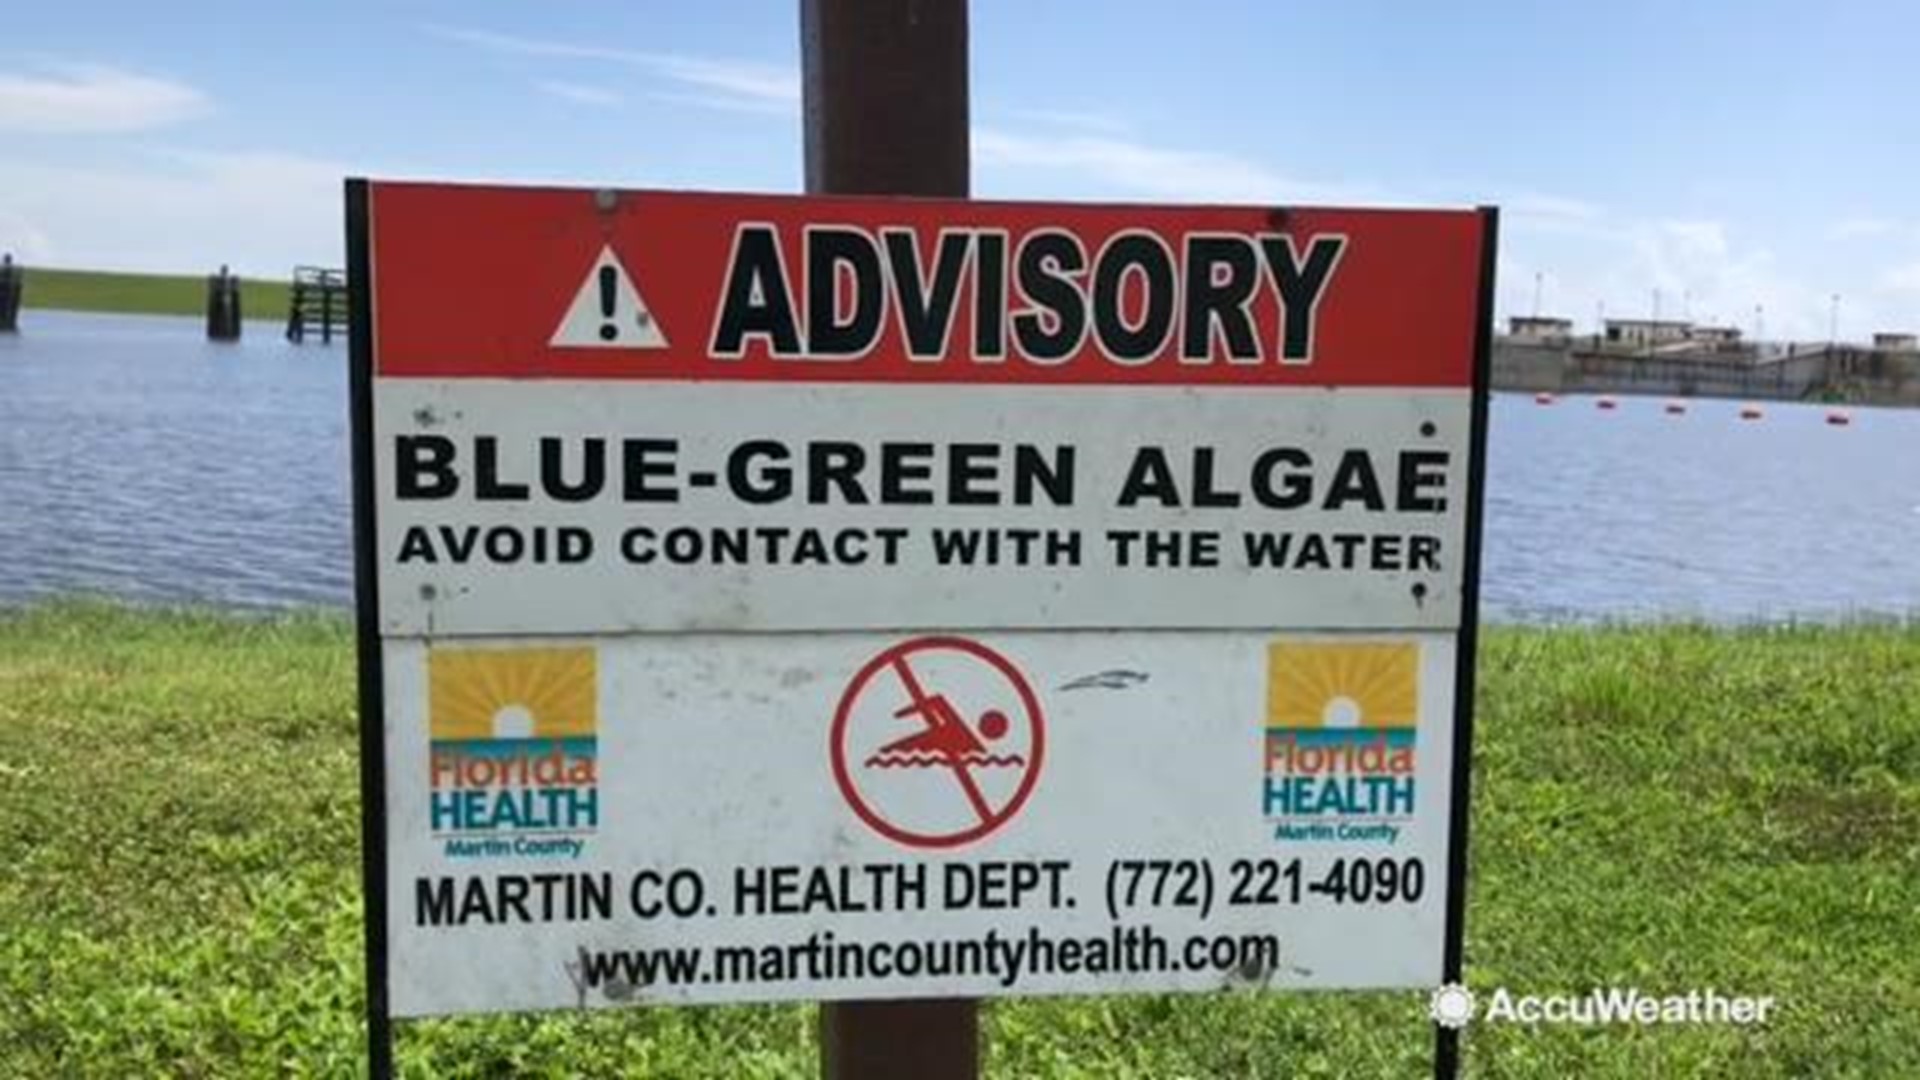 The thick algae on Lake Okeechobee has caused a State of Emergency, keeping the water behind the flood gates and stopping the spread down the rivers and eventually the coast.